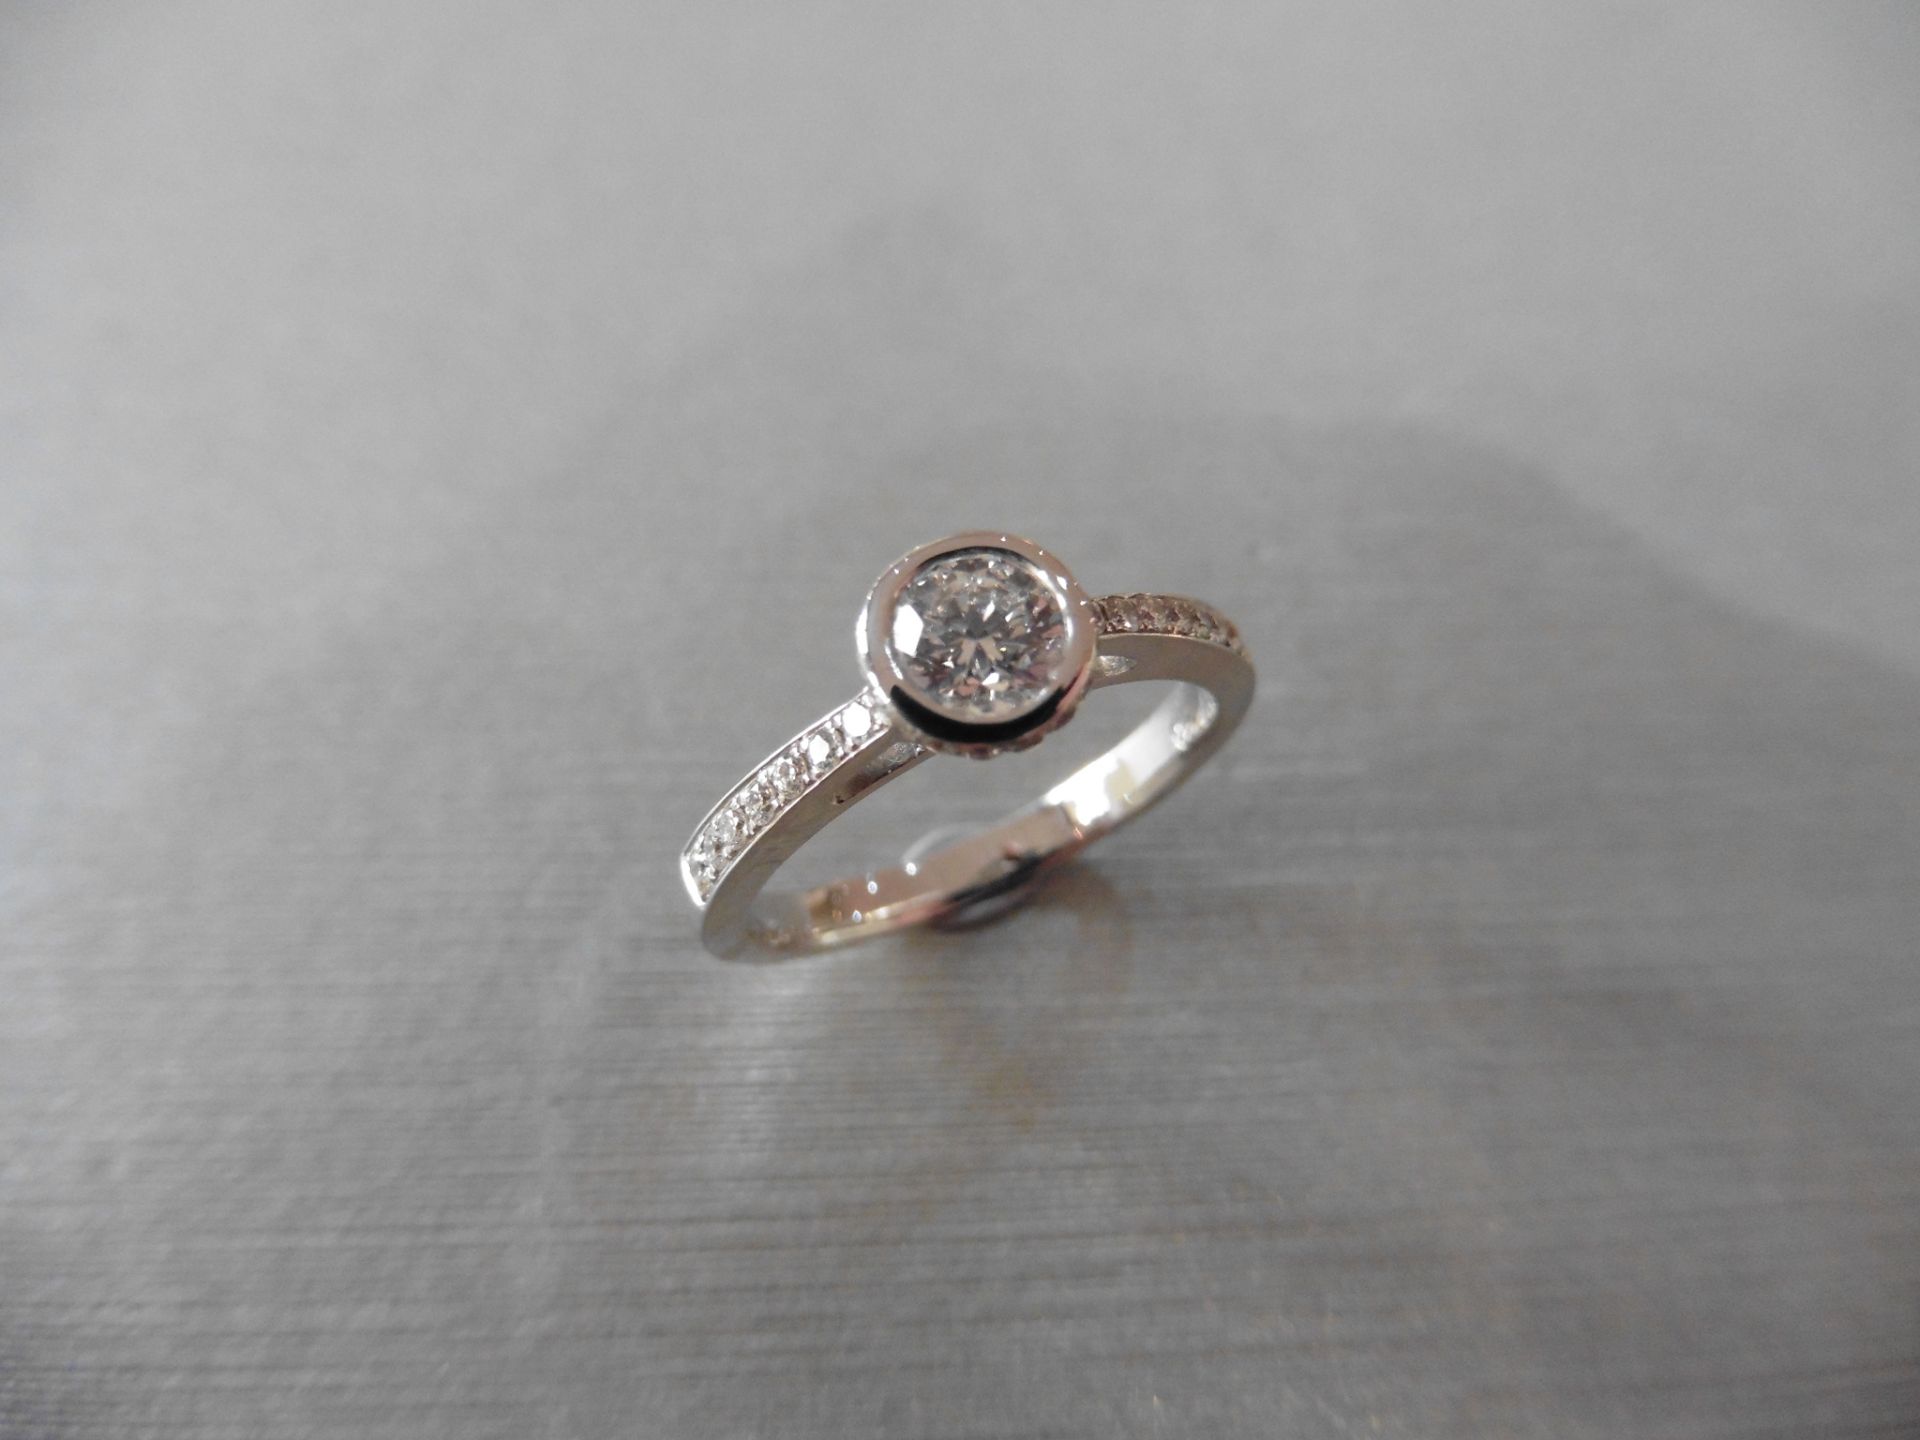 Brand new 18ct white gold diamond set solitaire ring with a Brilliant cut diamond weighing 0.41ct